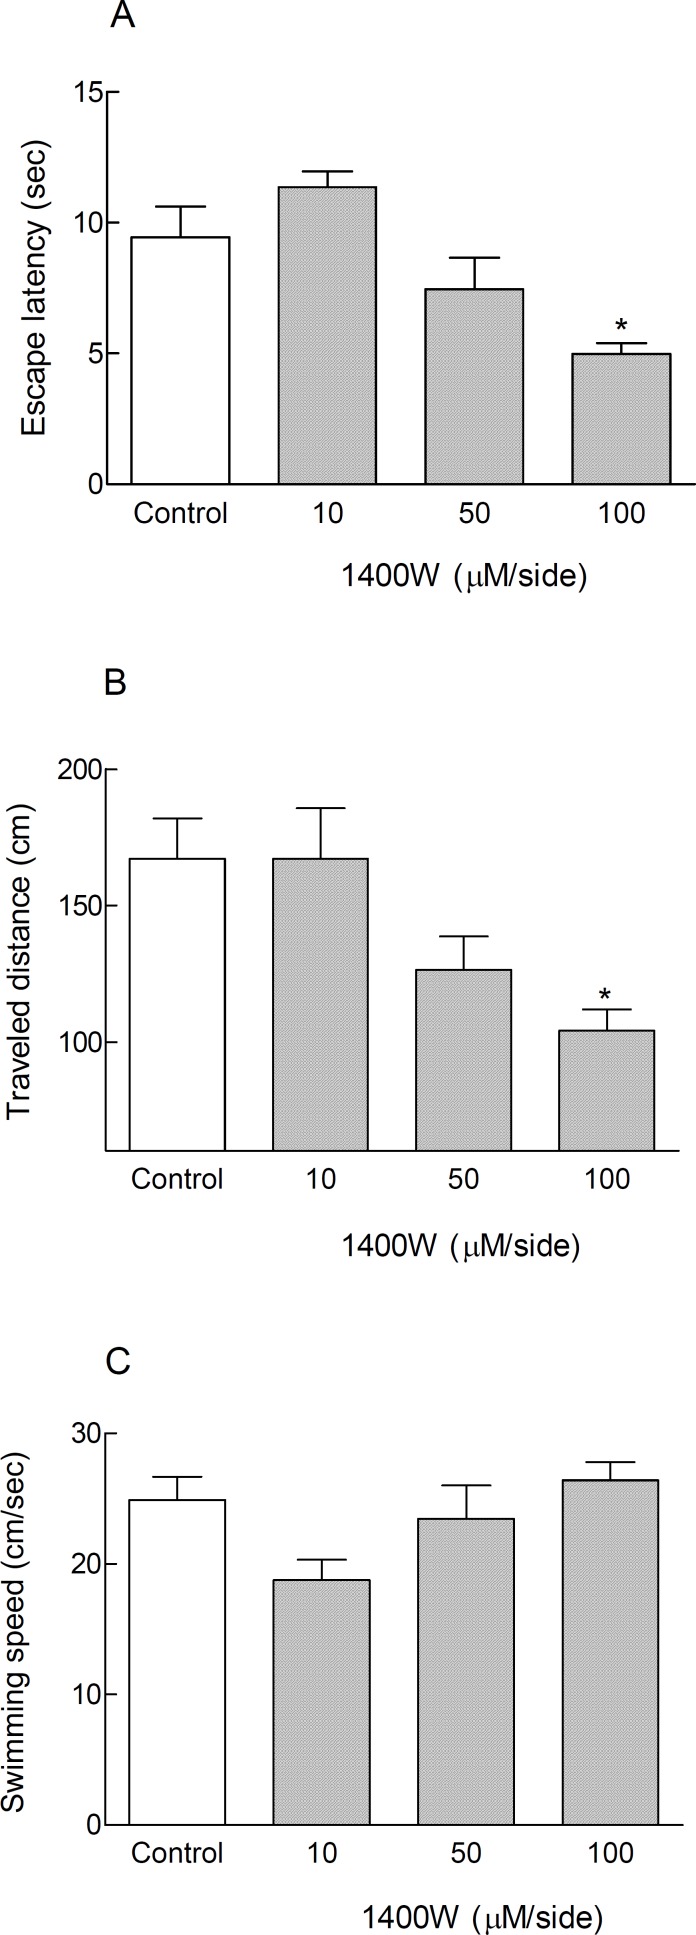 Treatment with 1400W, a selective iNOS inhibitor caused spatial memory improvement in cannulated non-anesthetized animals in Morris water maze during testing trials. Inhibition of inducible nitric oxide synthase by bilateral intra-hippocampal infusion of 1400W (100 μM/side) via cannulas after surgical recovery, led to significant decrease in escape latency and traveled distance (* P < 0.05) in comparison with control group (Figures 1A and 1B). The swimming speed did not change significantly in all treated animals (Figure 1C). Each bar graph shows mean ± SEM for 8 animals in each group